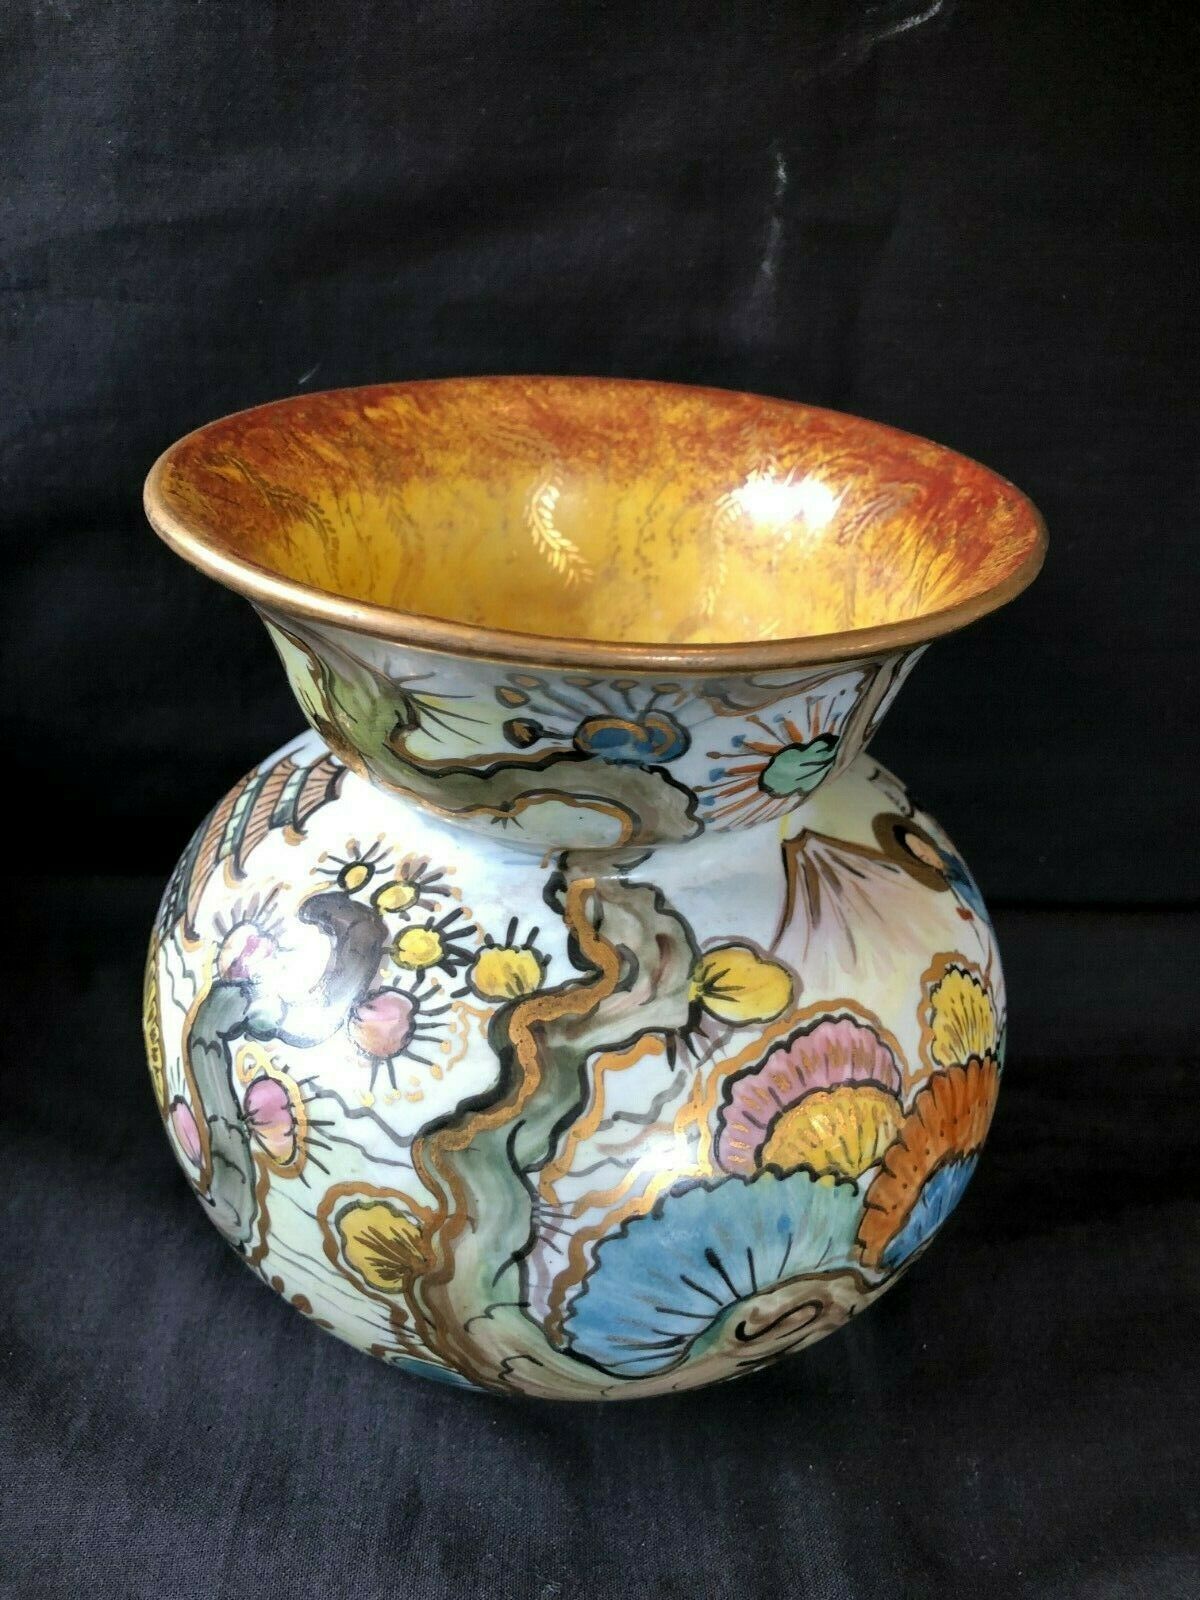 Primary image for Antique signed chinese porcelain / pottery vase